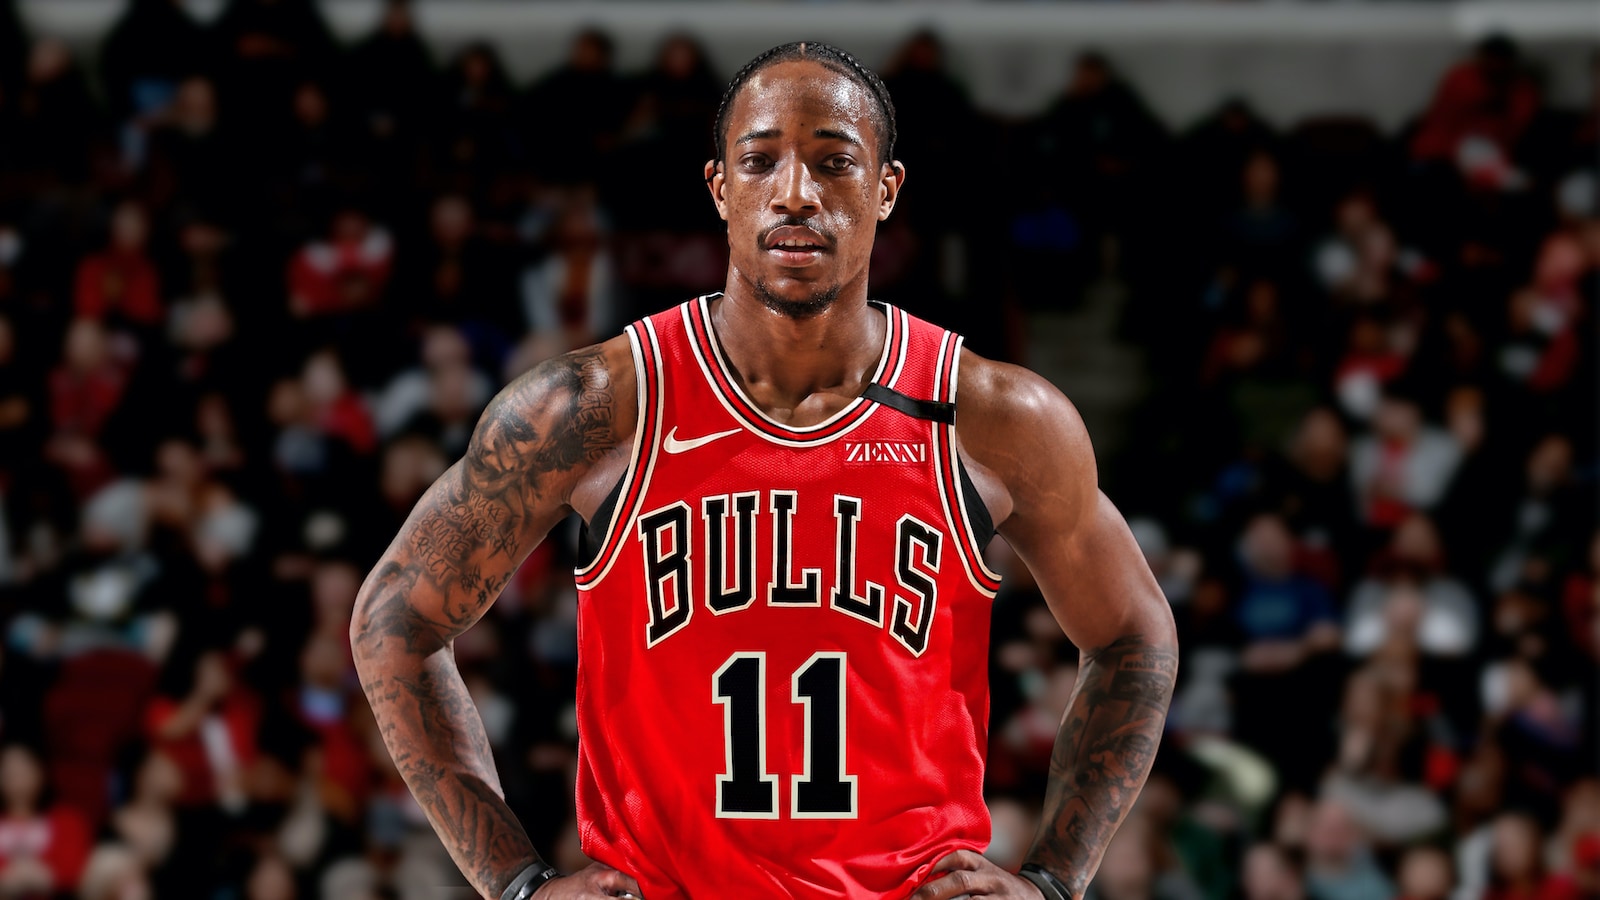 DeMar DeRozan is shown with a Chicago Bulls jersey while standing on an NBA court.